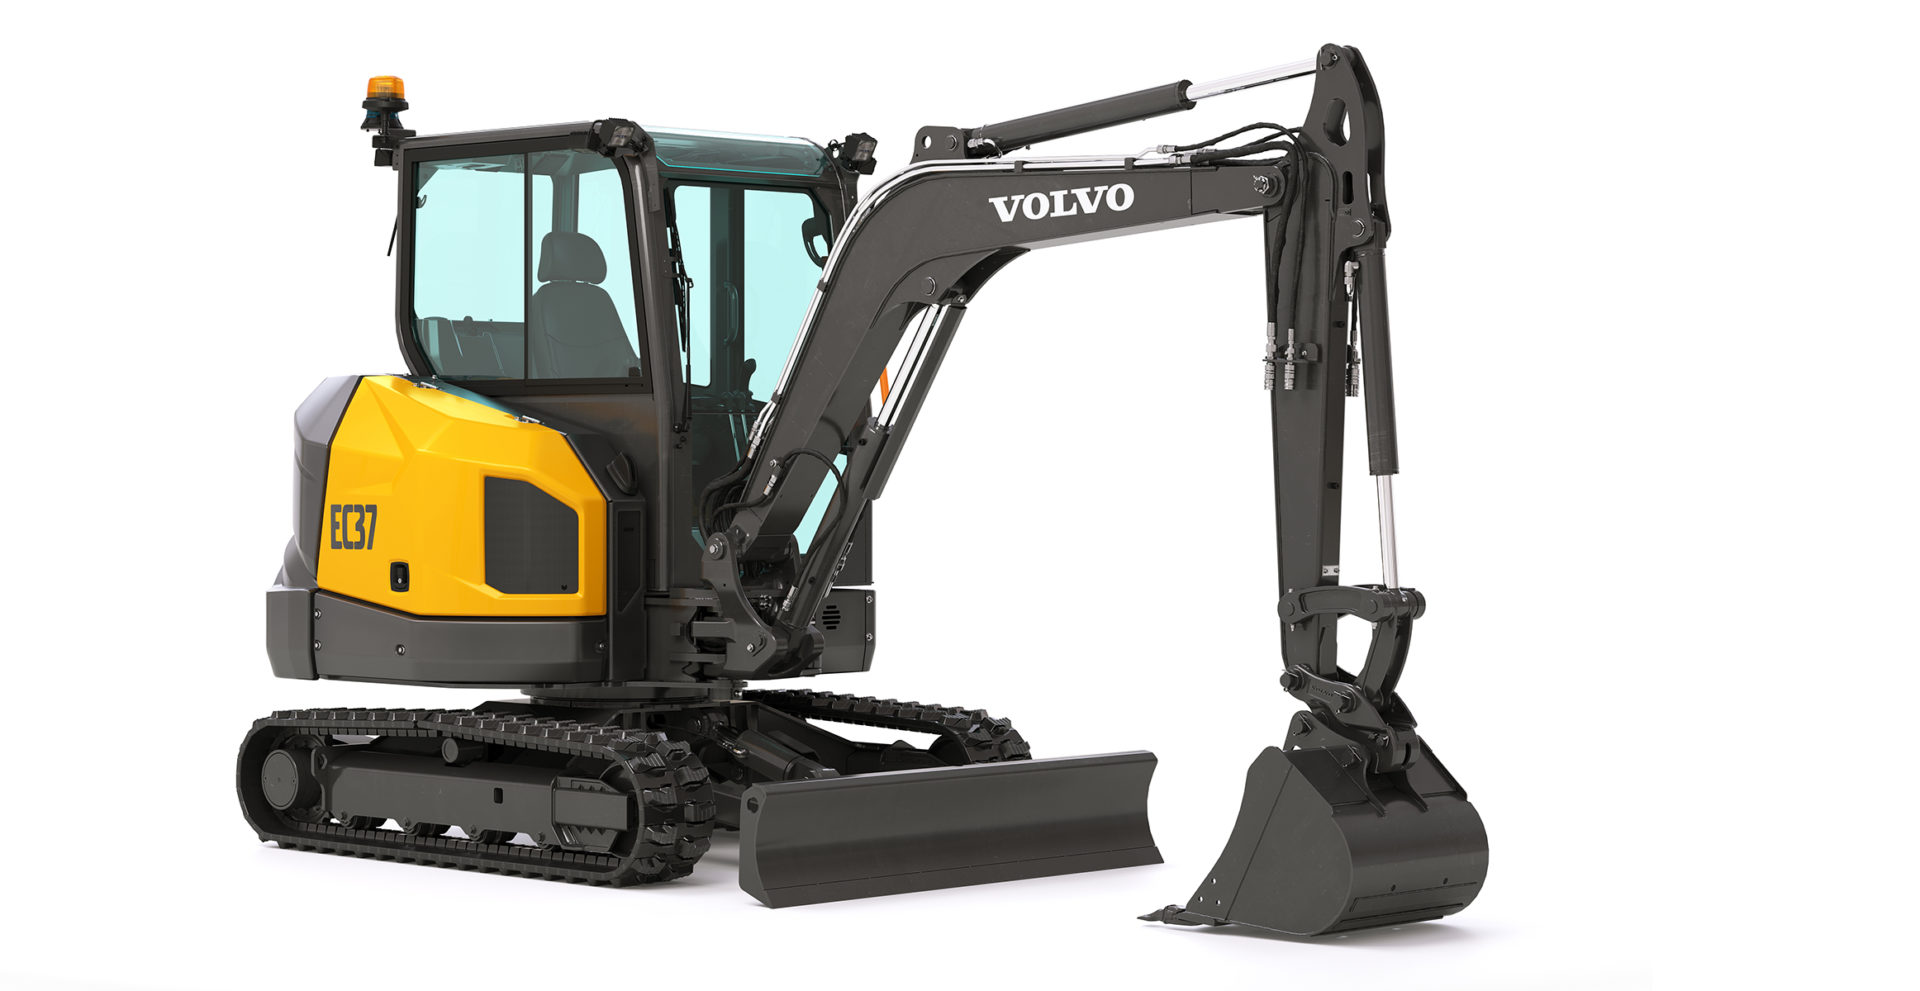 volvo benefit compact excavator ec37f sv highlighted features 23241200